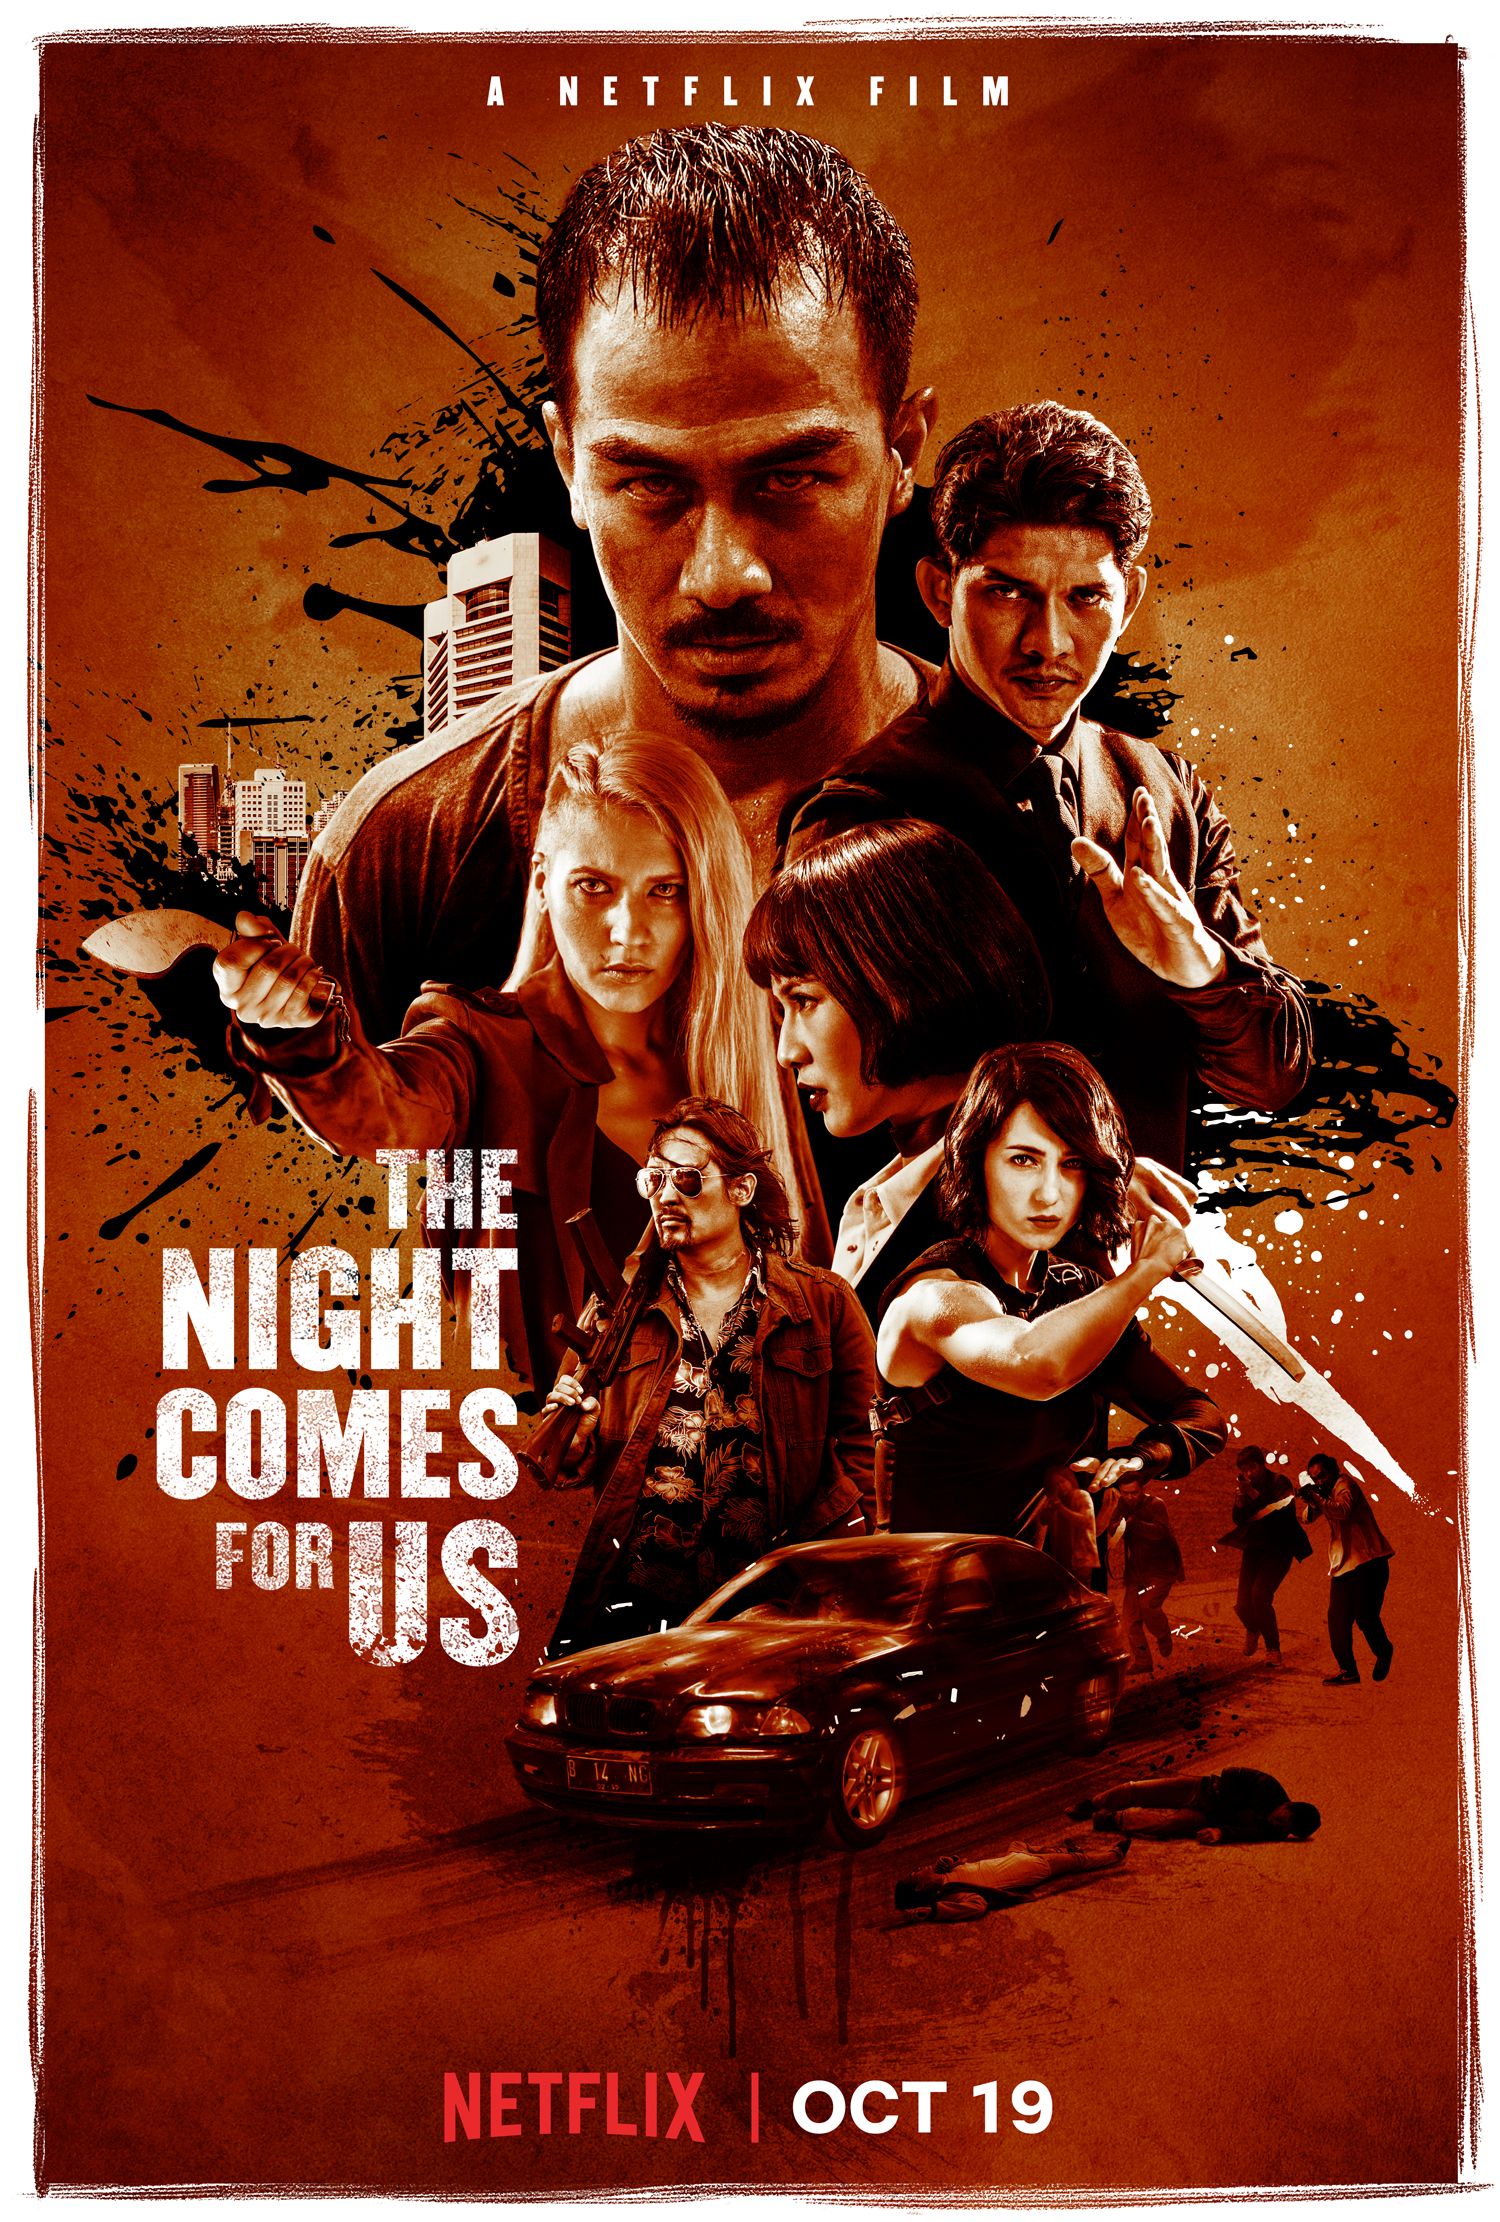 The Night Comes for Us (2018) Hindi Dubbed Full Movie